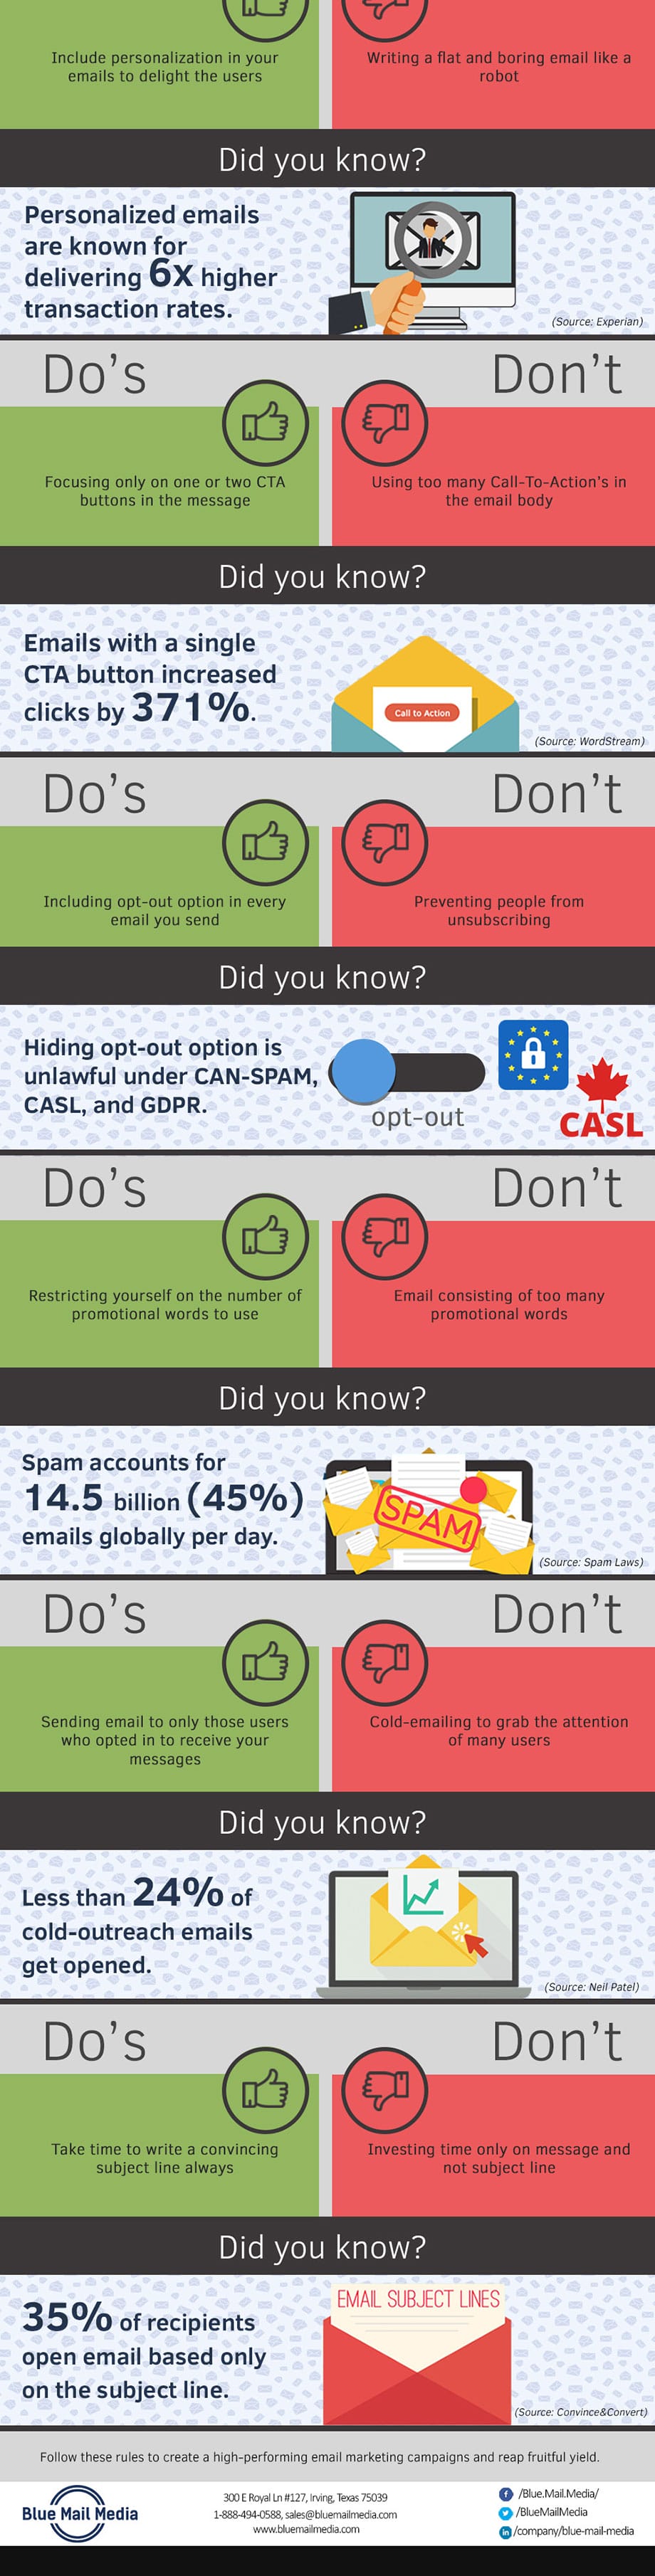 Do’s and Donts For Successful Email Marketing Campaign